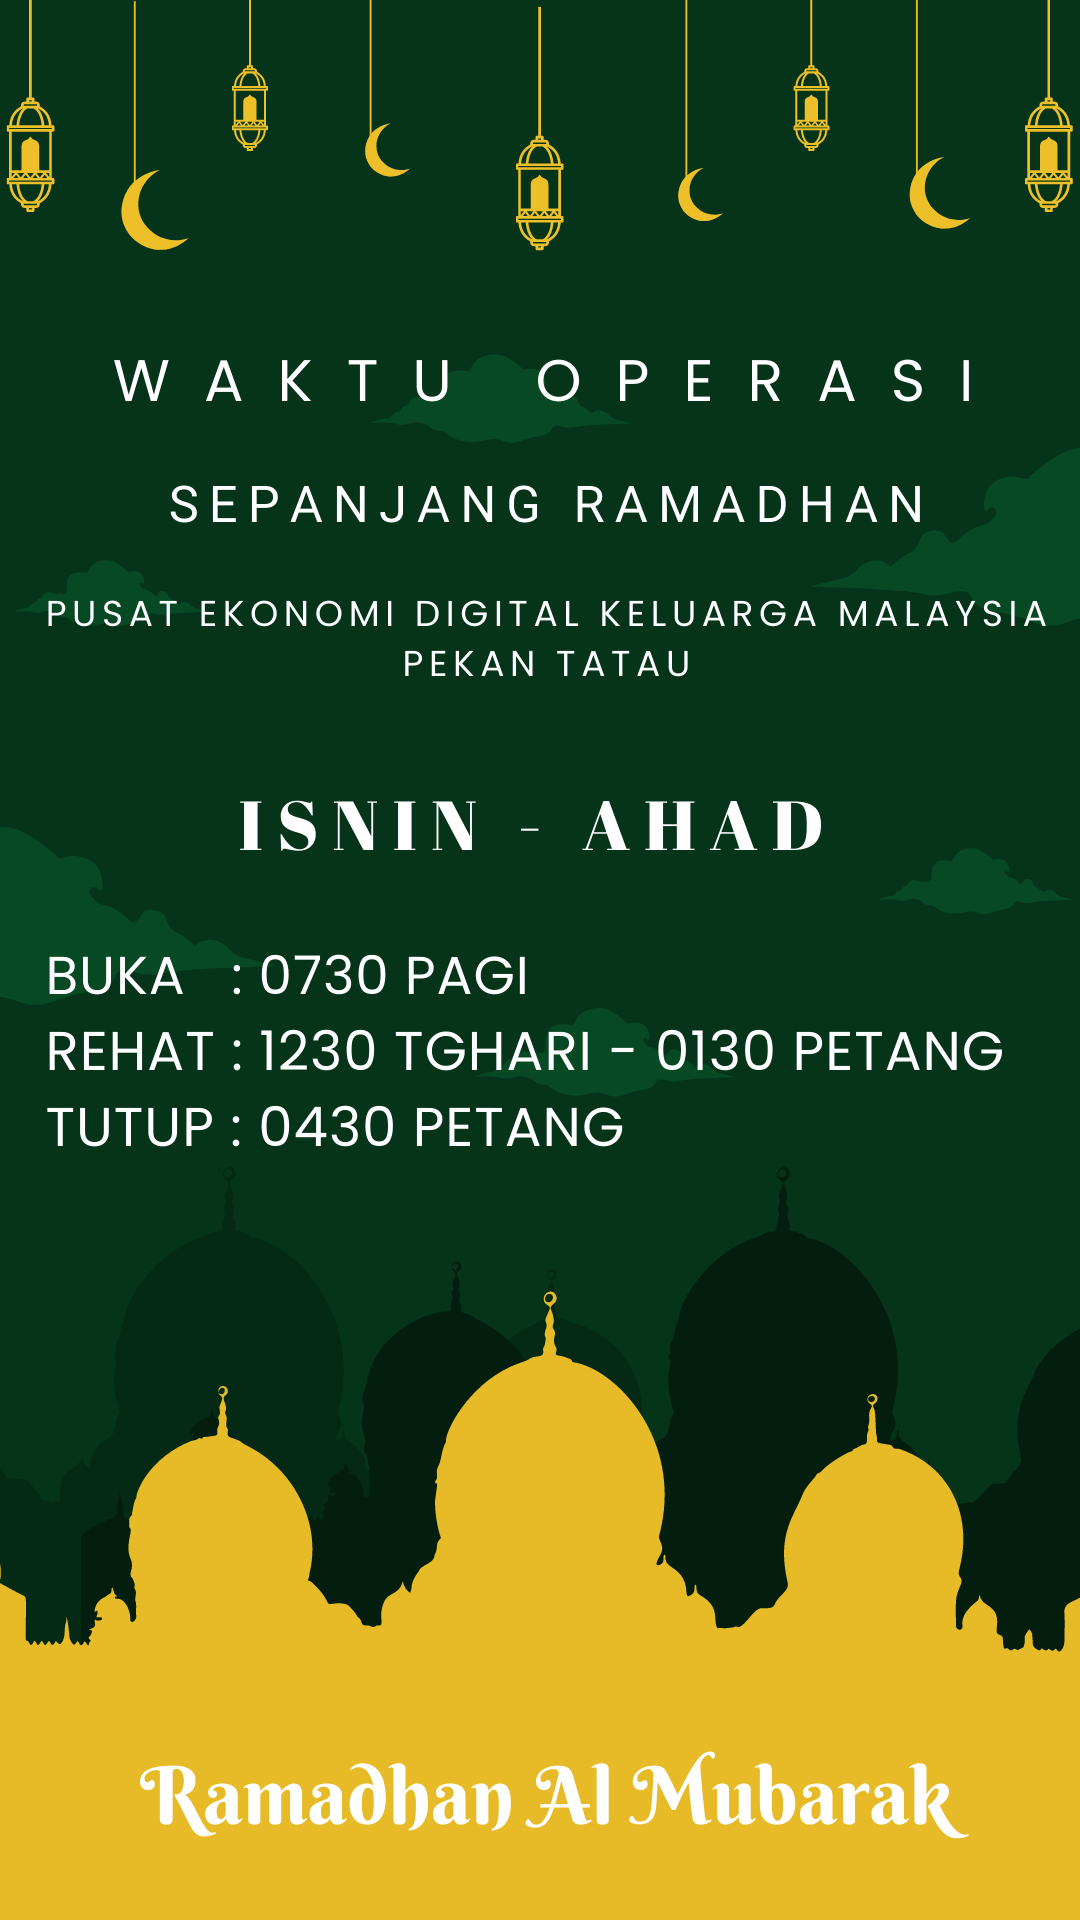 Green-Yellow-Simple-Welcome-Ramadhan-Instagram-Story